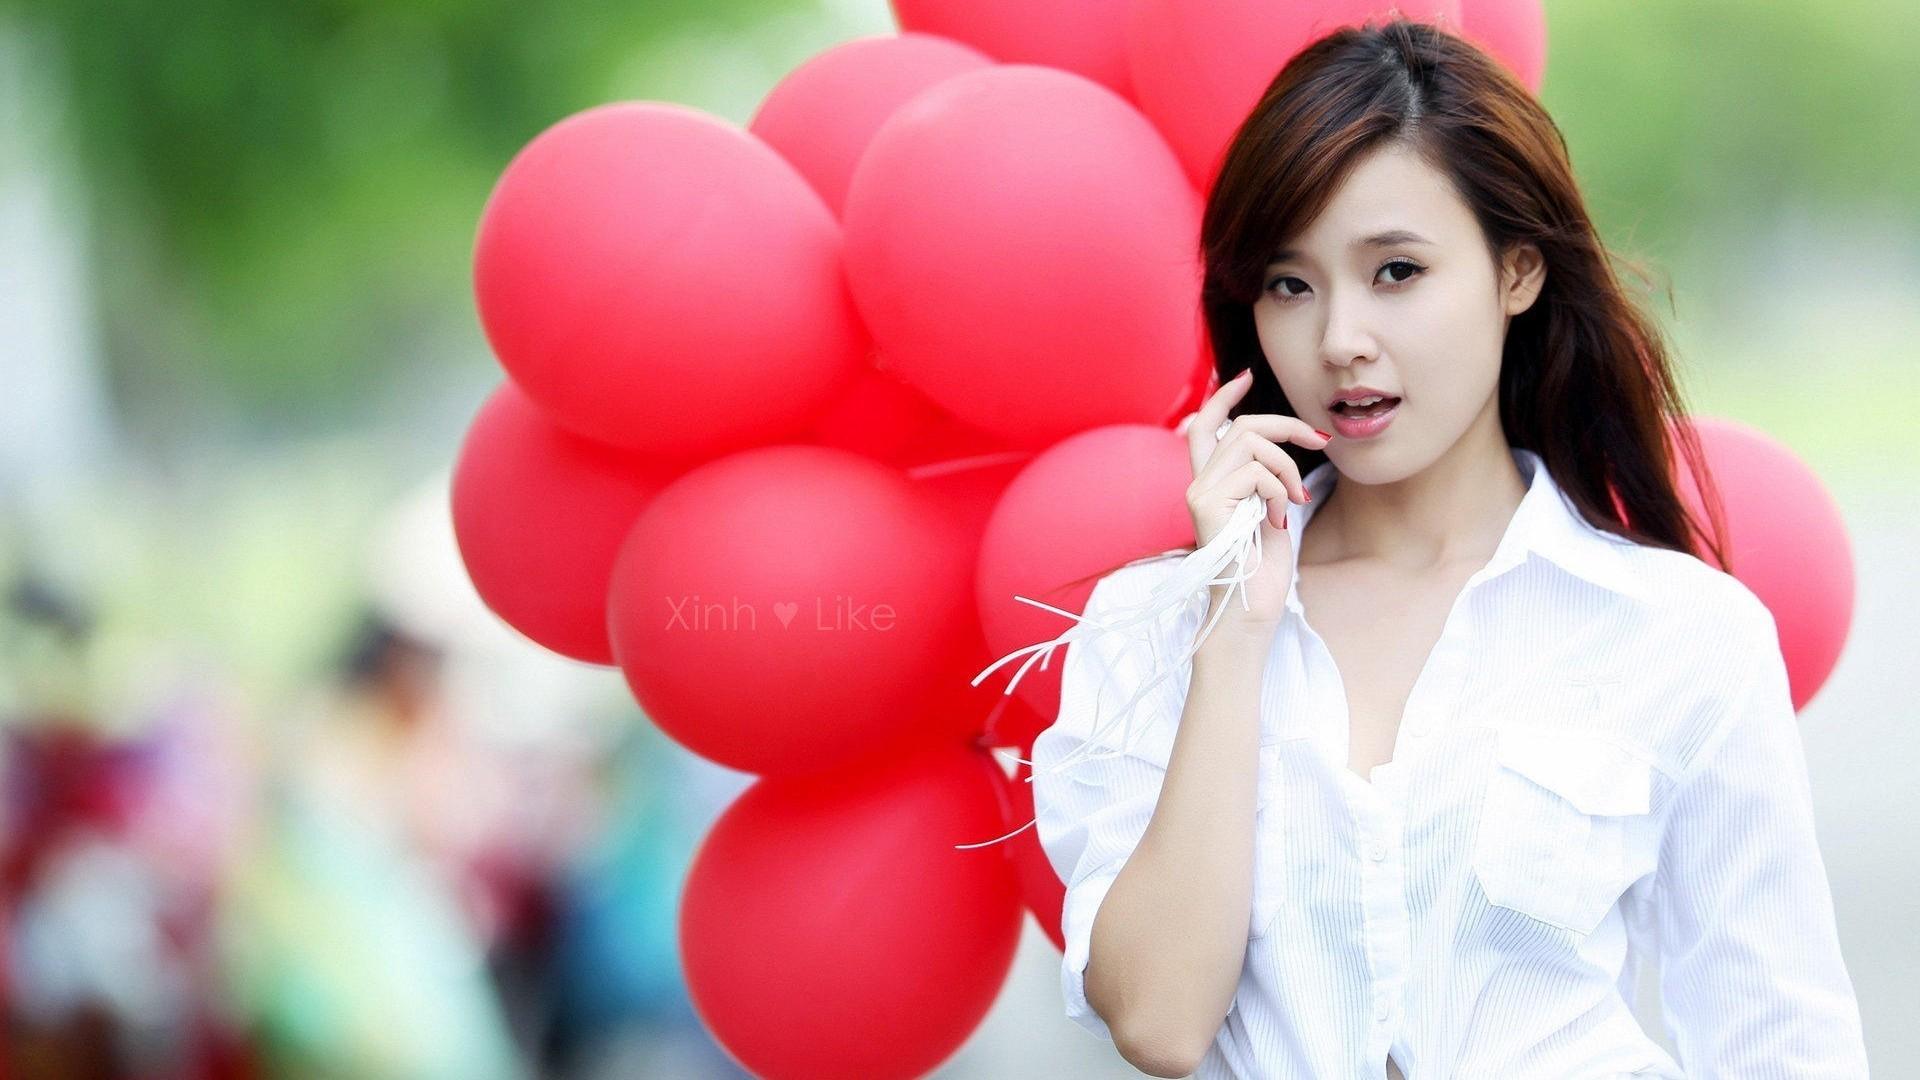 Beautiful girl with balloons wallpaper. PC